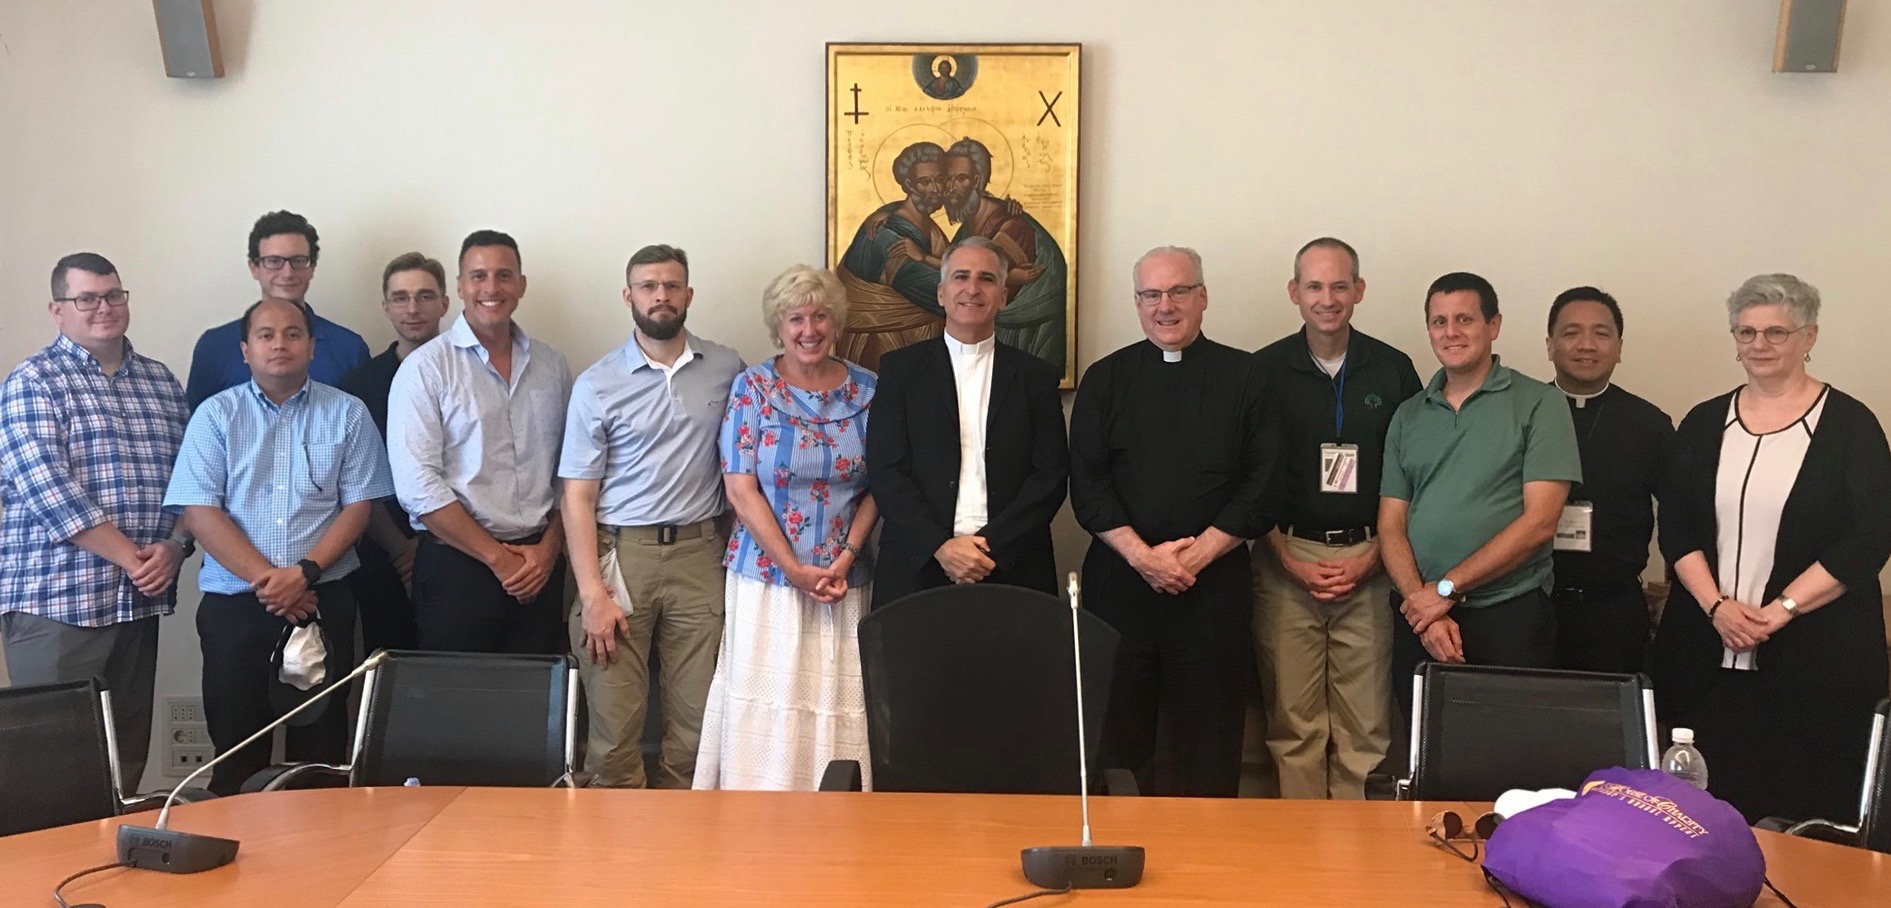 Seminarians from Immaculate Conception Seminary School of Theology - Seton Hall University on their first pilgrimage to Rome with The Lay Centre.